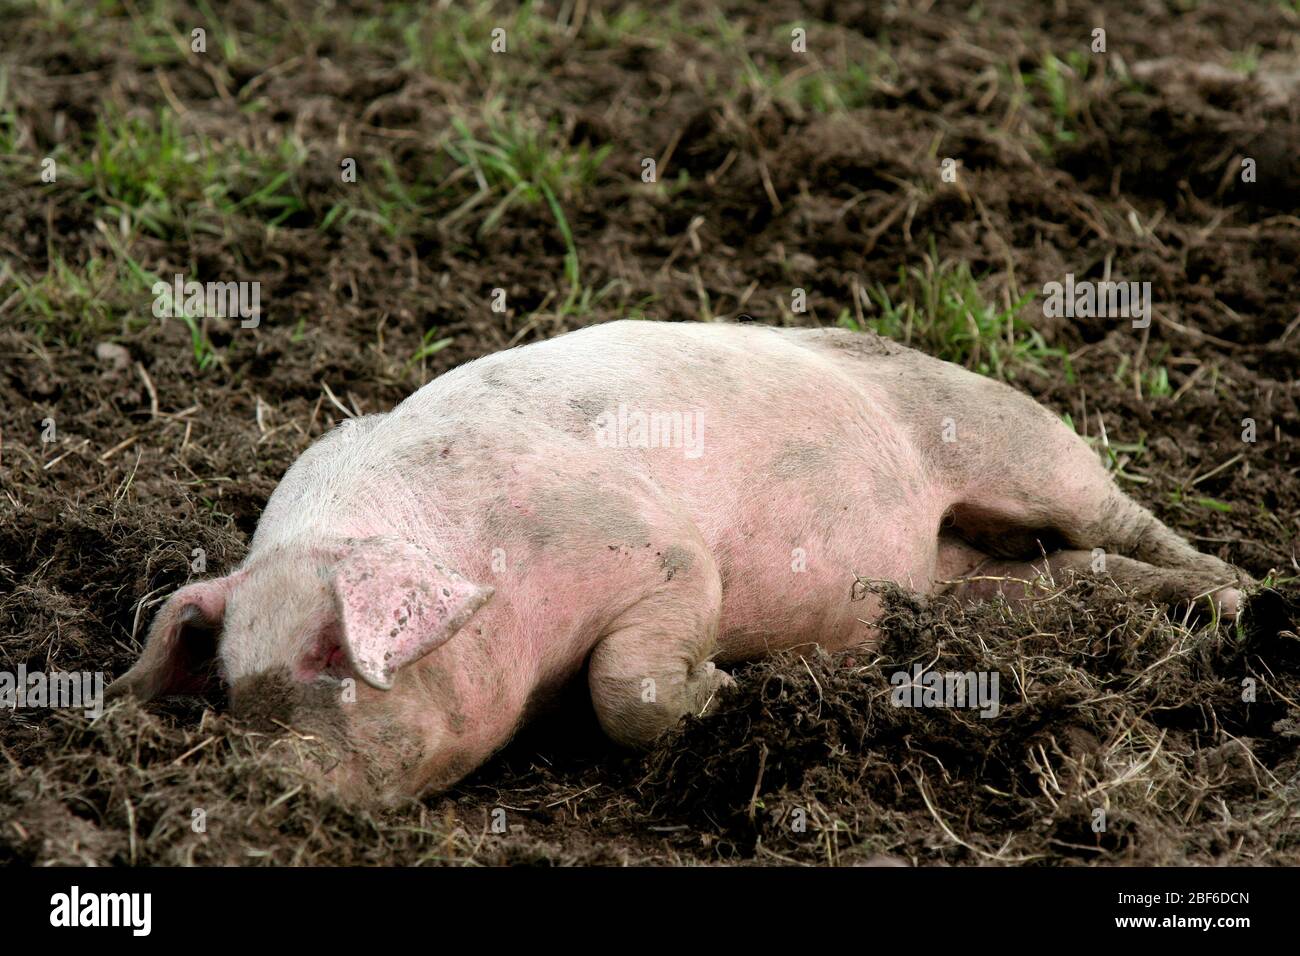 Swedish pigs living their life in a muddy environment and seems to love it. Stock Photo